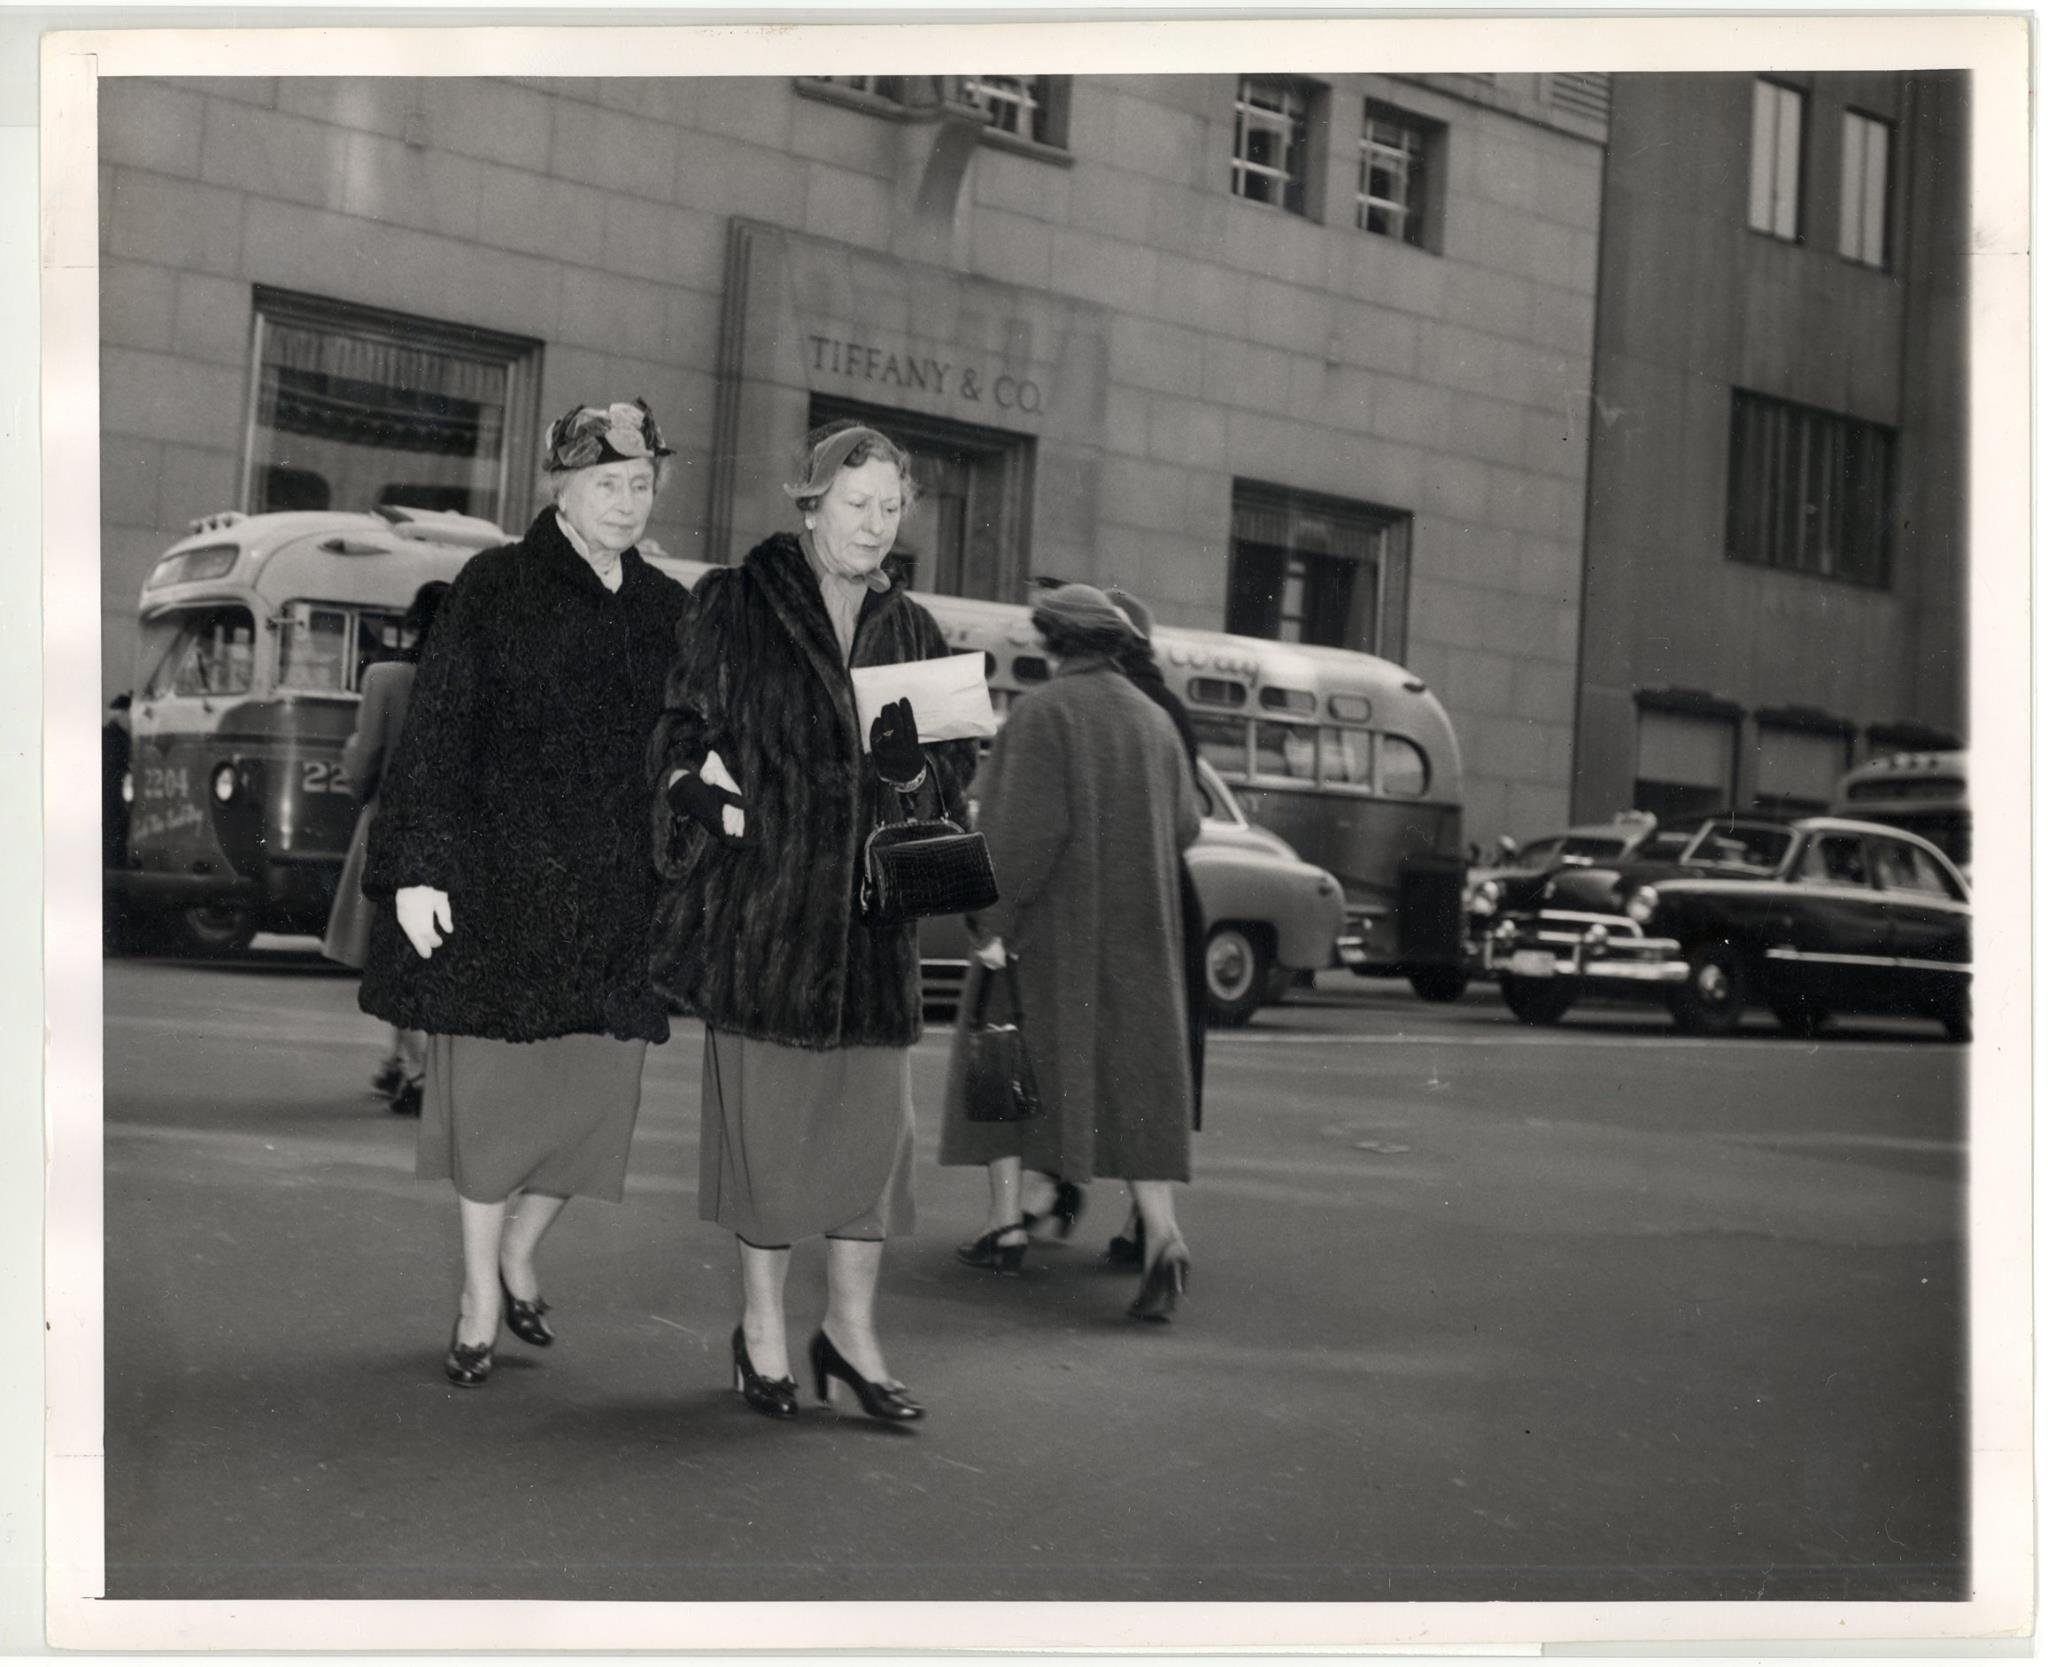 Helen Keller and Polly Thomson crossing the street in front of Tiffany and Co. store, 5th Avenue and 57th Street, New York City, circa 1956